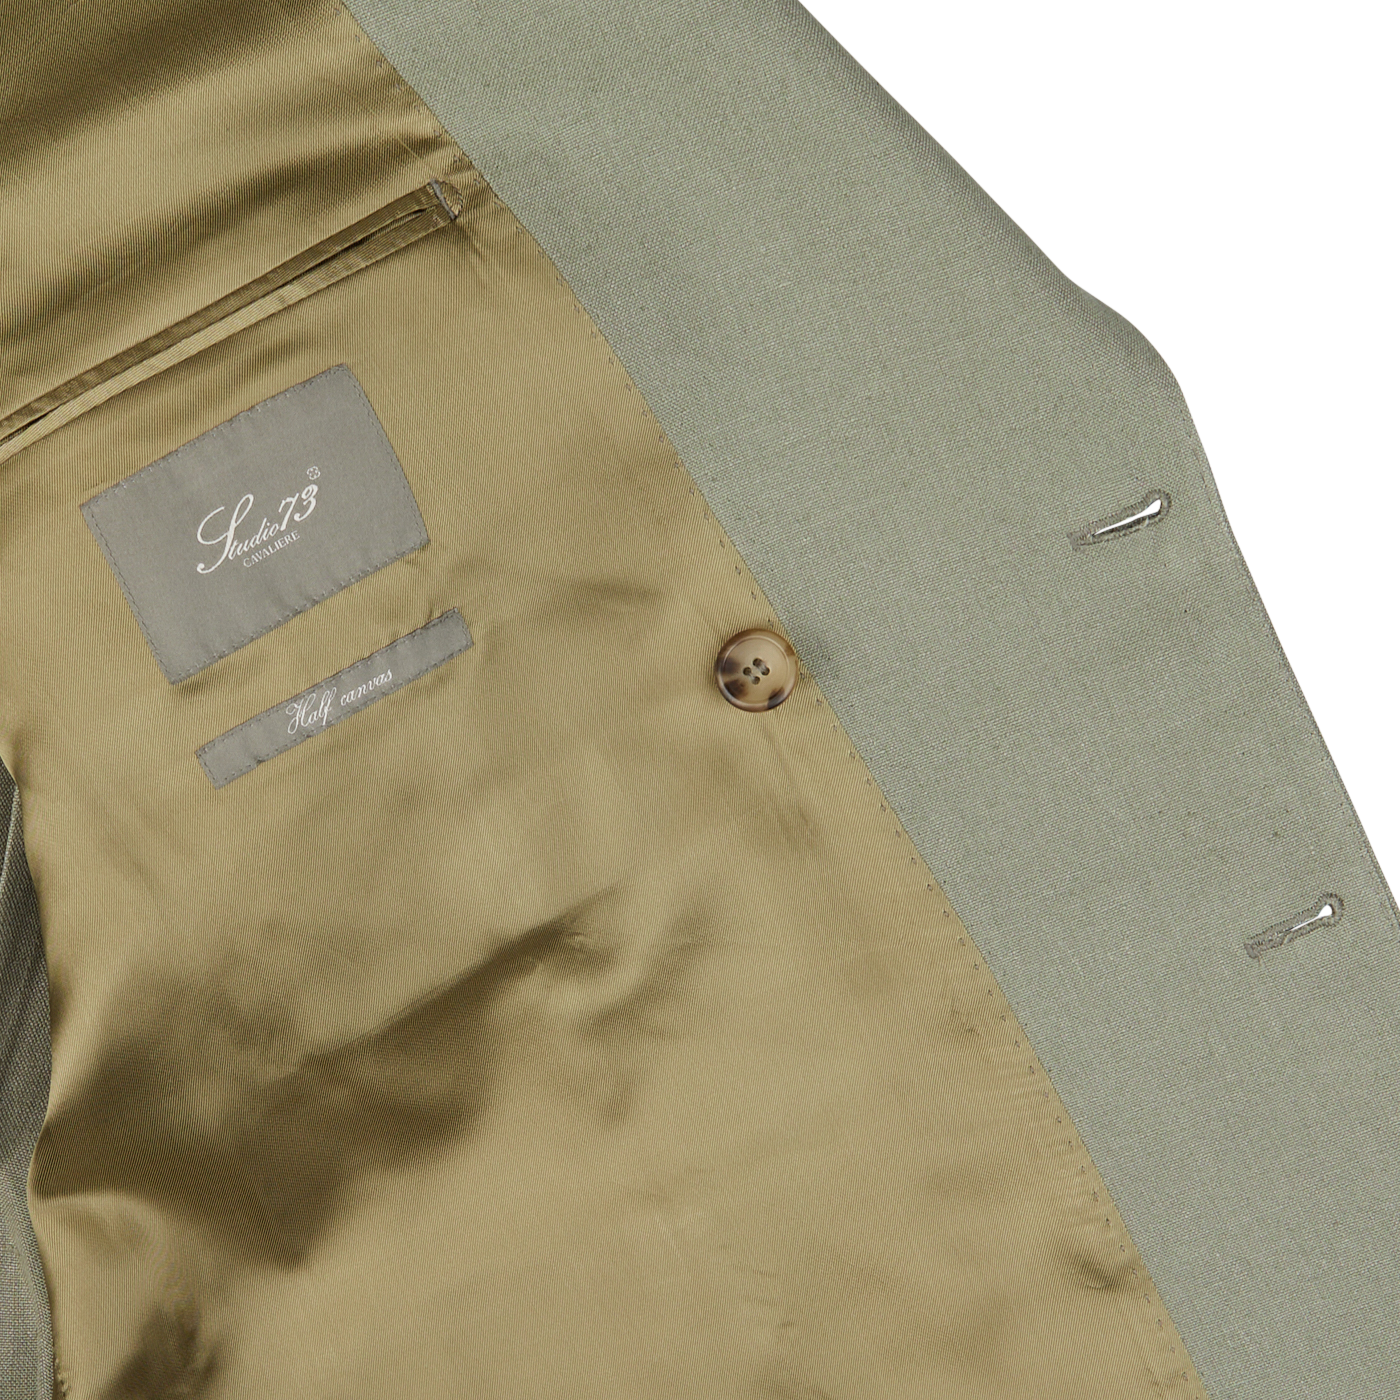 Close-up view of the inside of a Sage Green Canapa Hemp DB Suit featuring a brown button and a label with text in the inner pocket. This exquisite piece, crafted from luxurious Loro Piana canapa hemp linen, showcases impeccable attention to detail by Studio 73.